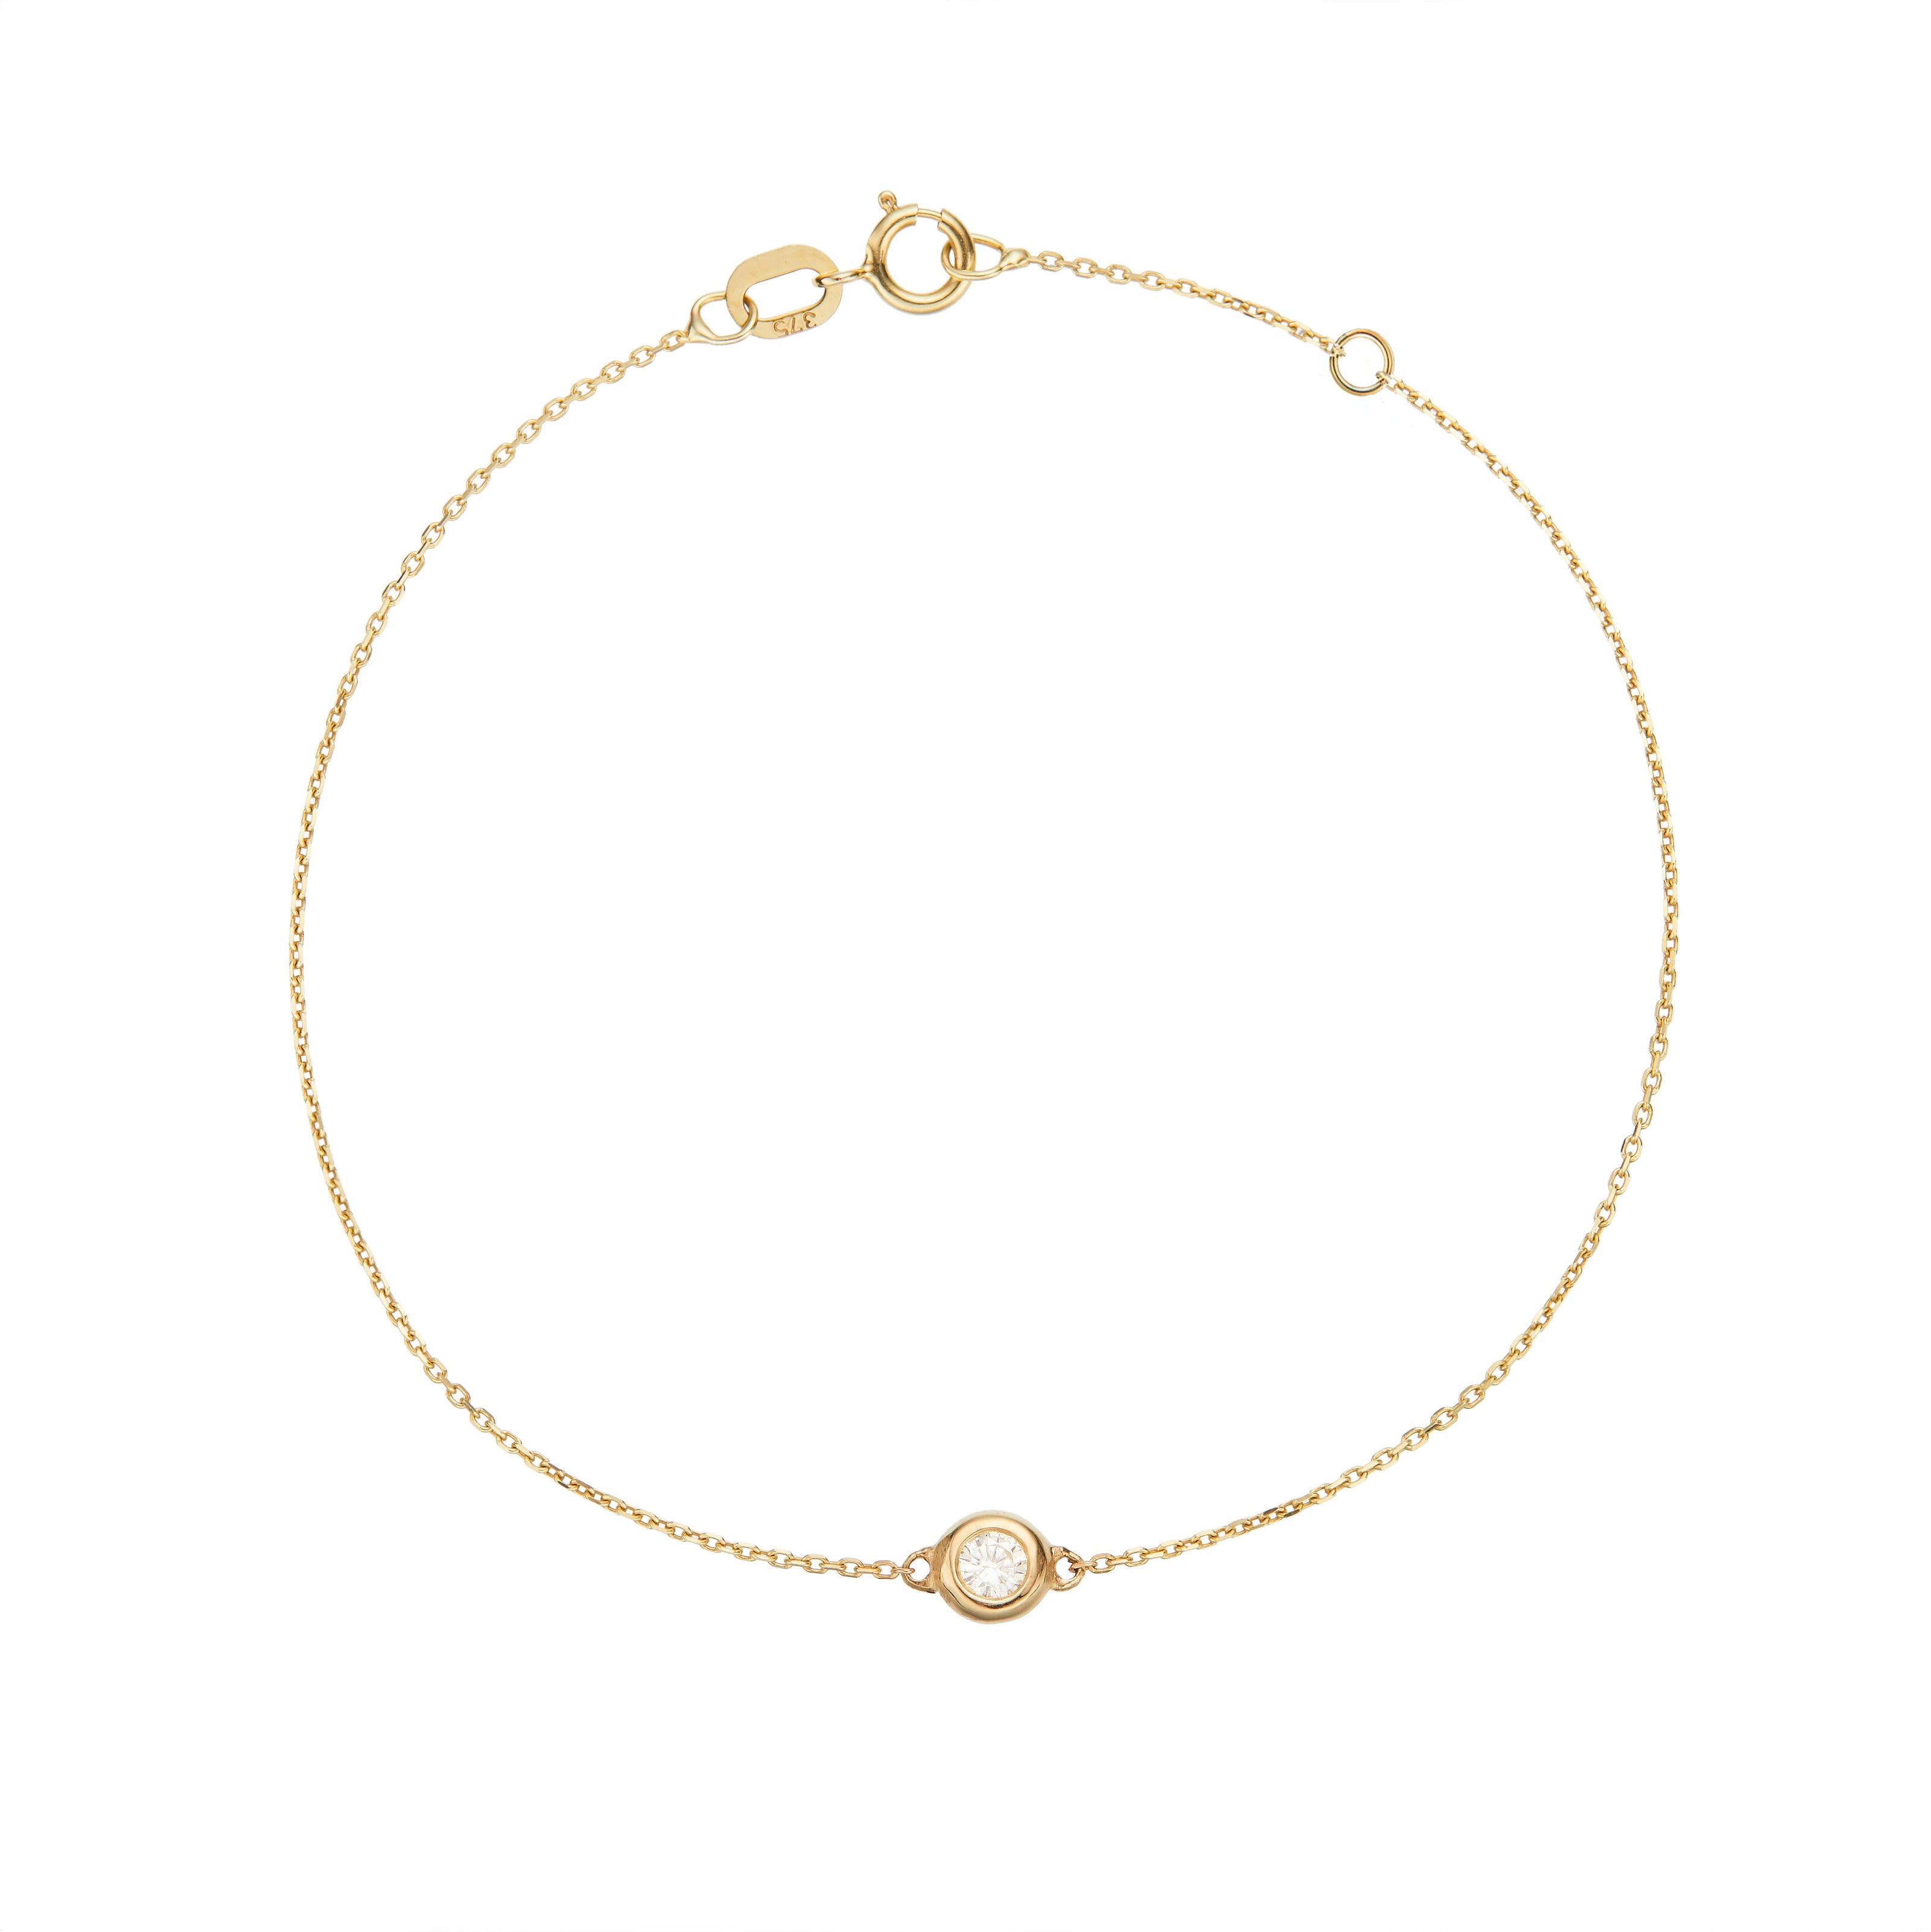 Solid Gold Floating Diamond Bracelet – Lily & Roo